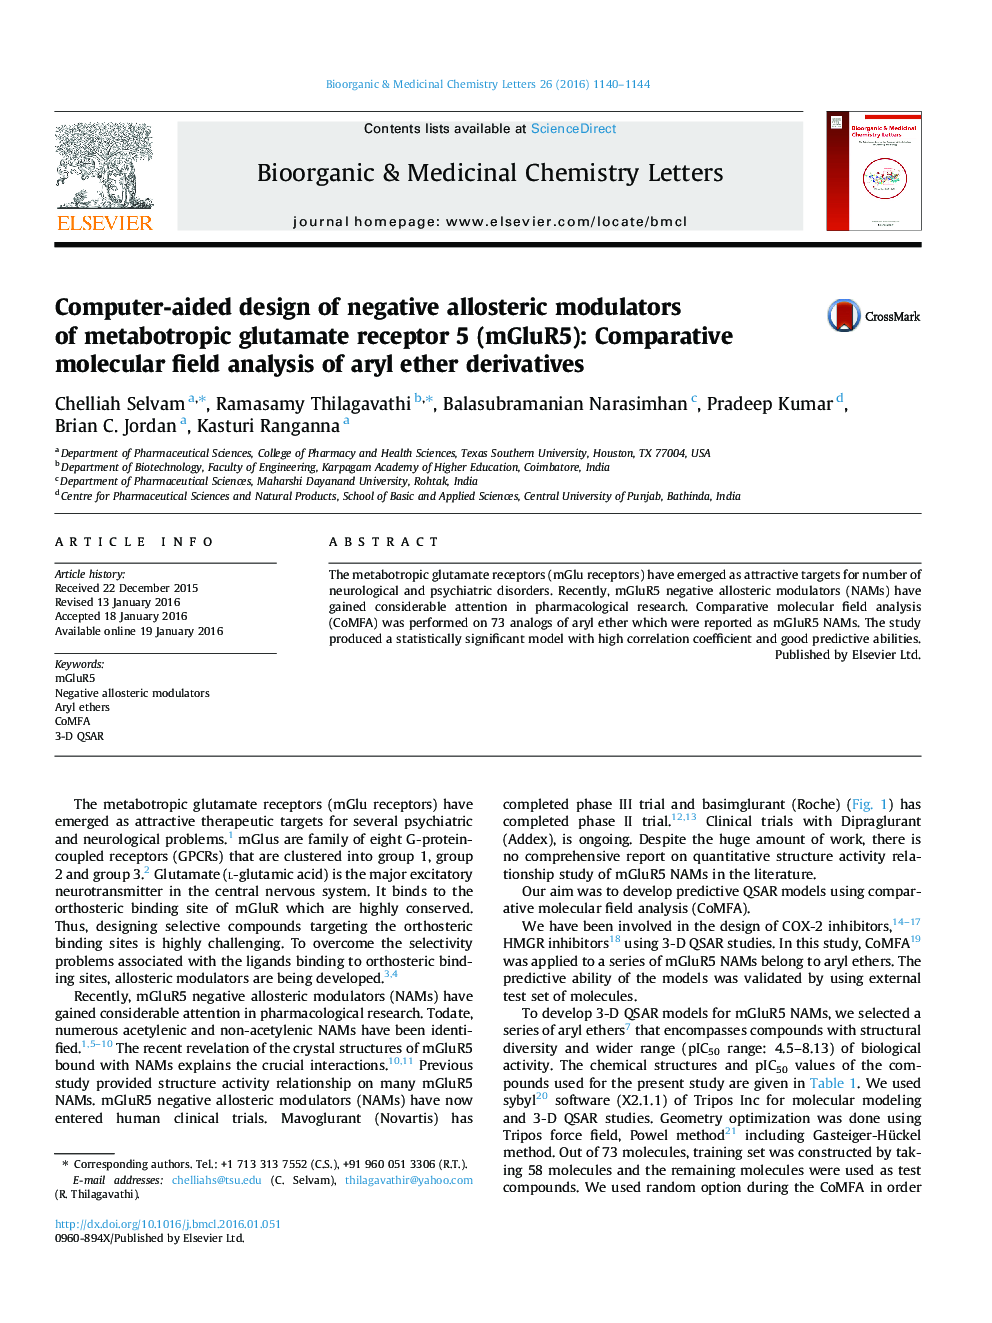 Computer-aided design of negative allosteric modulators of metabotropic glutamate receptor 5 (mGluR5): Comparative molecular field analysis of aryl ether derivatives